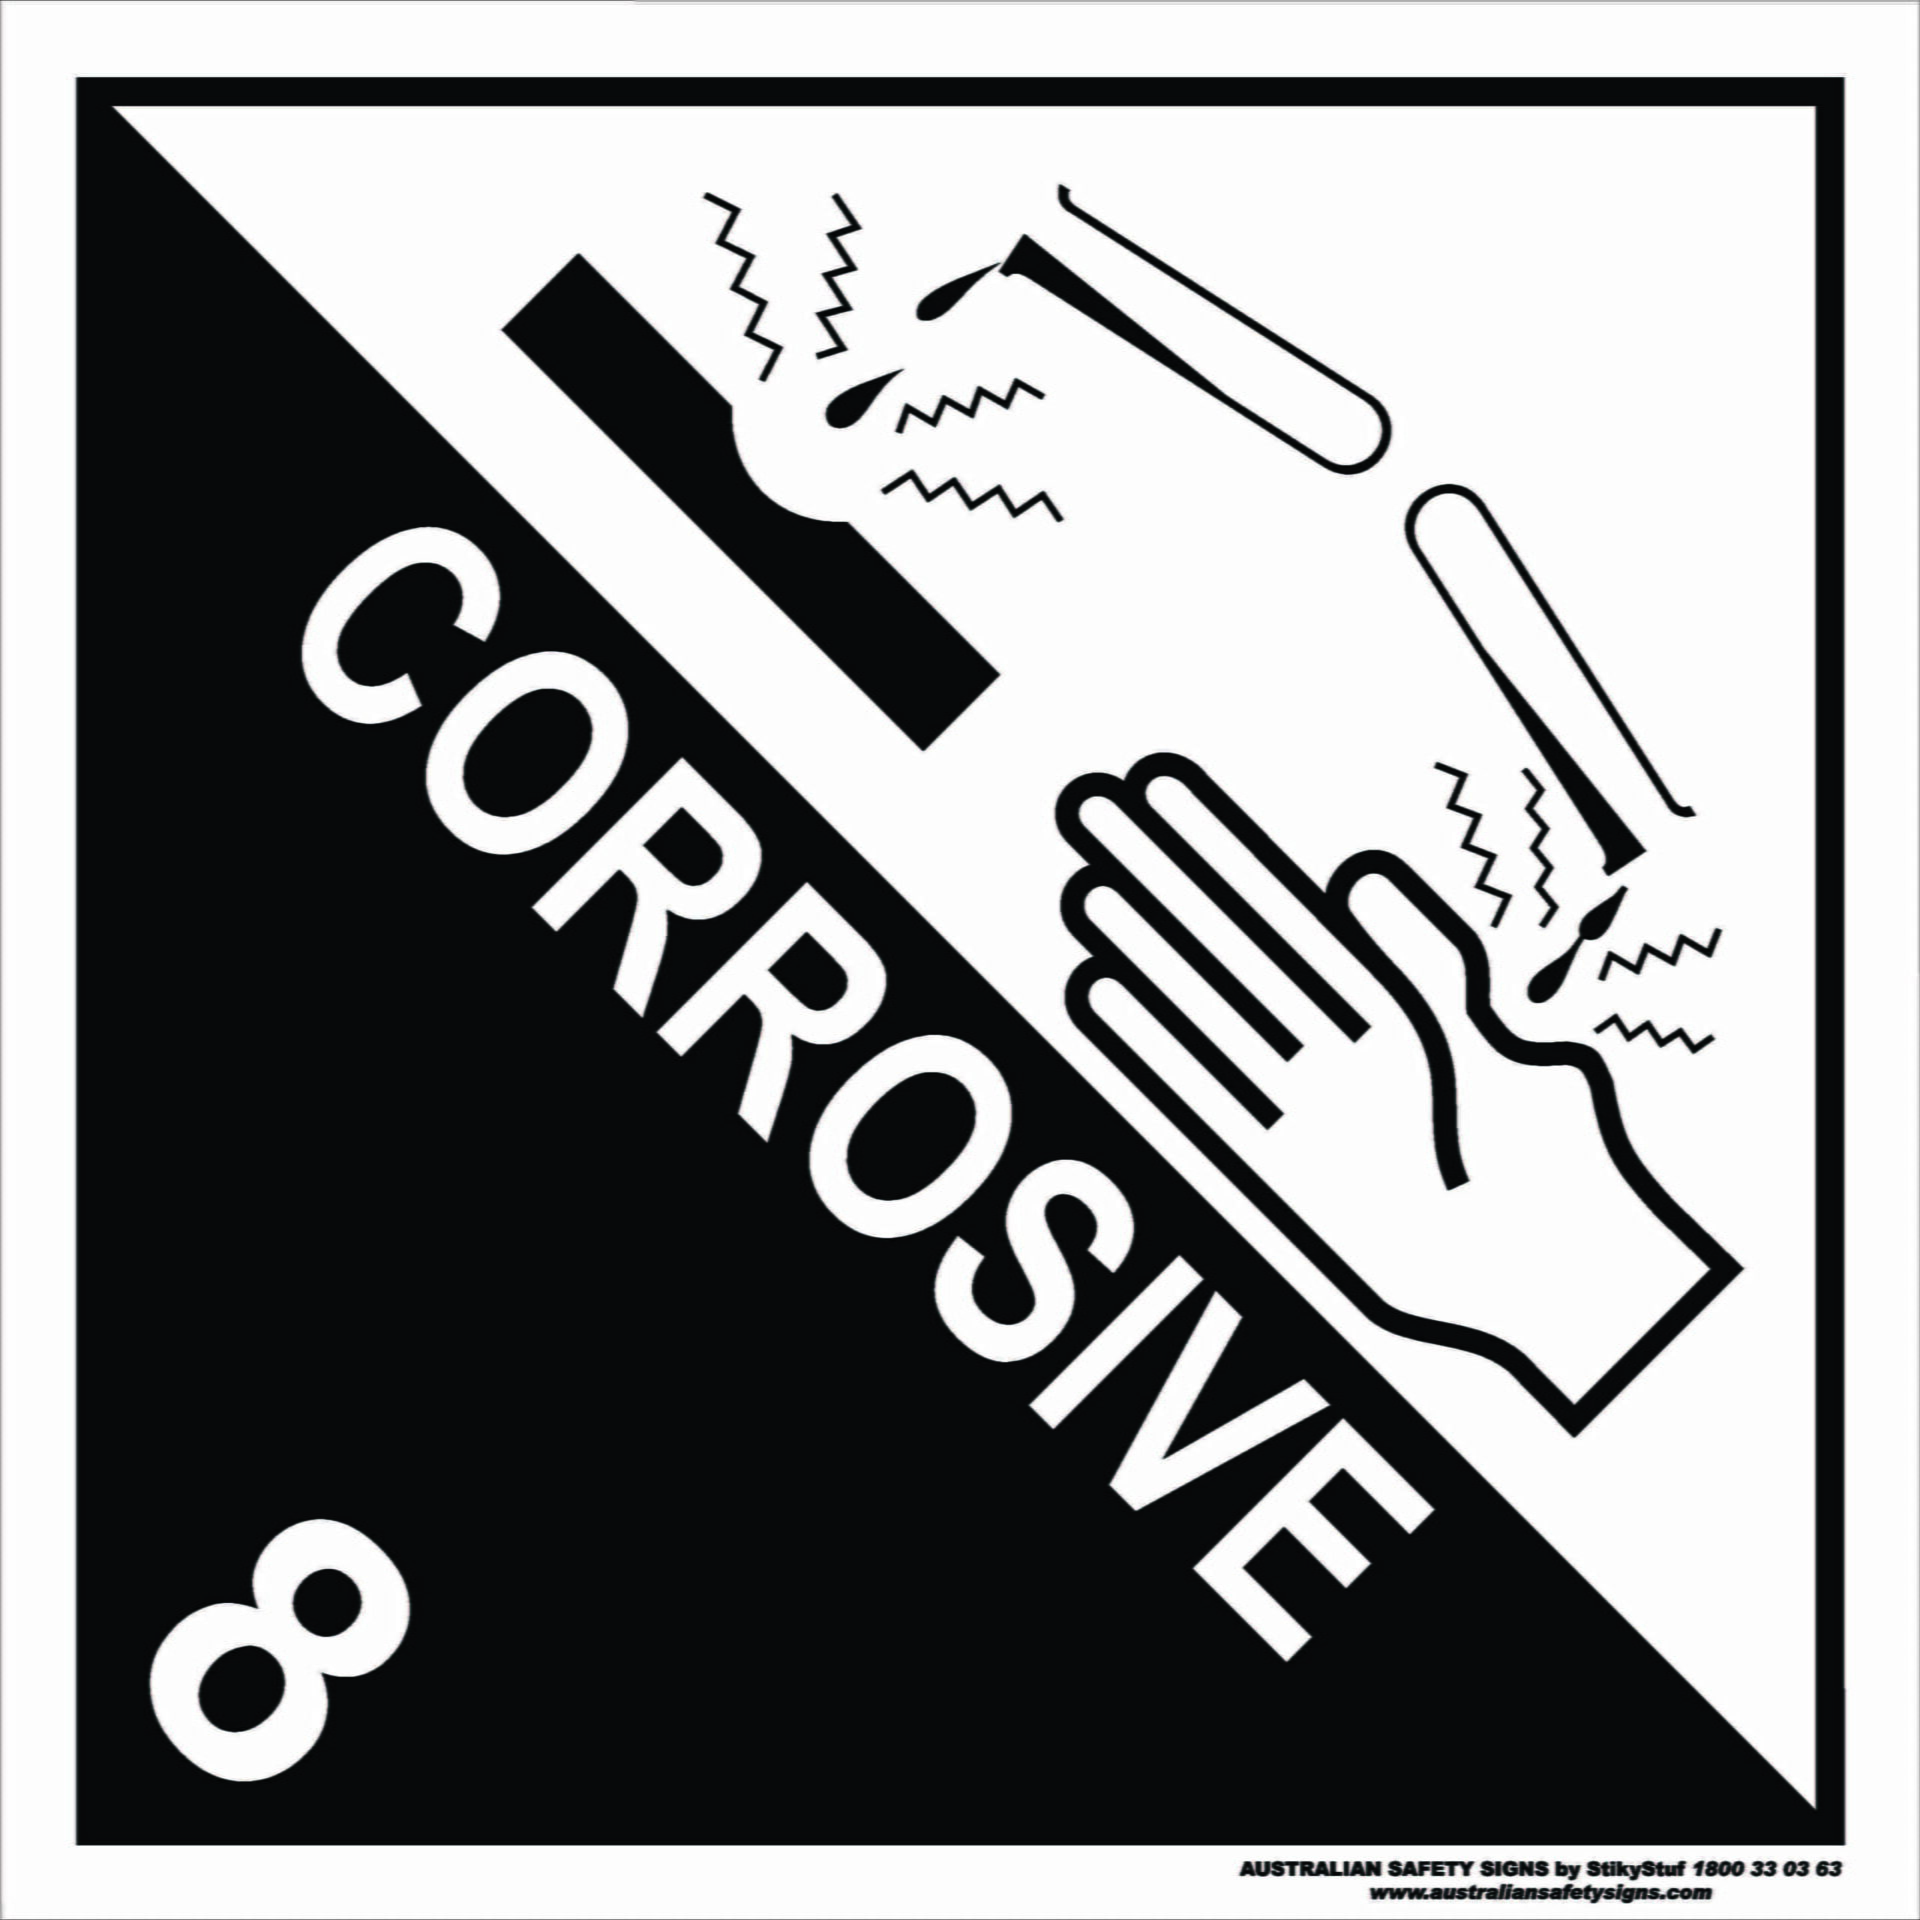 Corrosive substances and articles sign for dangerous goods transport in Australia - Safety Choice